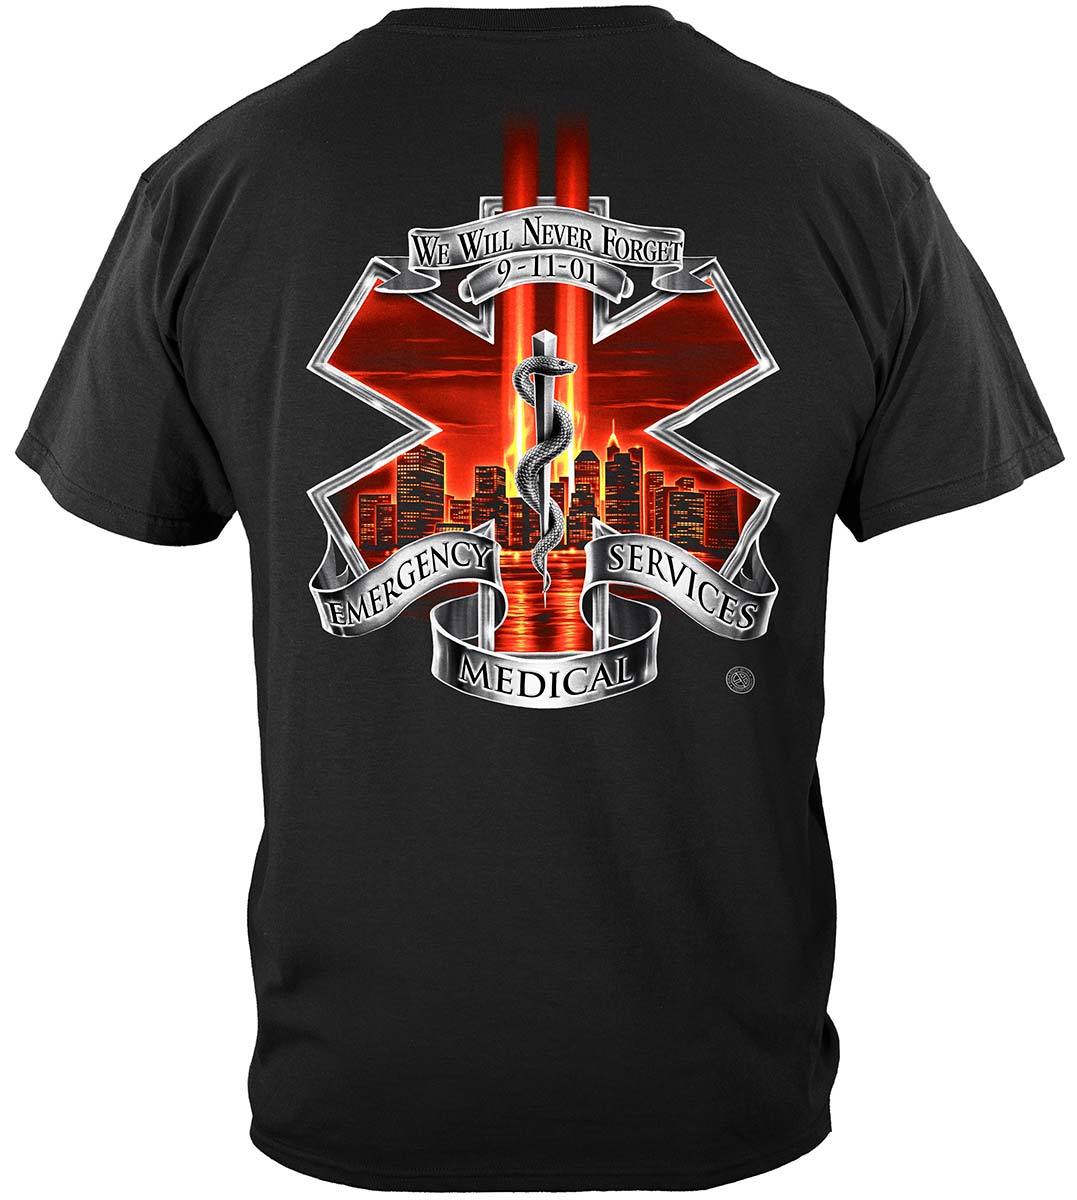 Red High Honors EMS Premium Long Sleeves